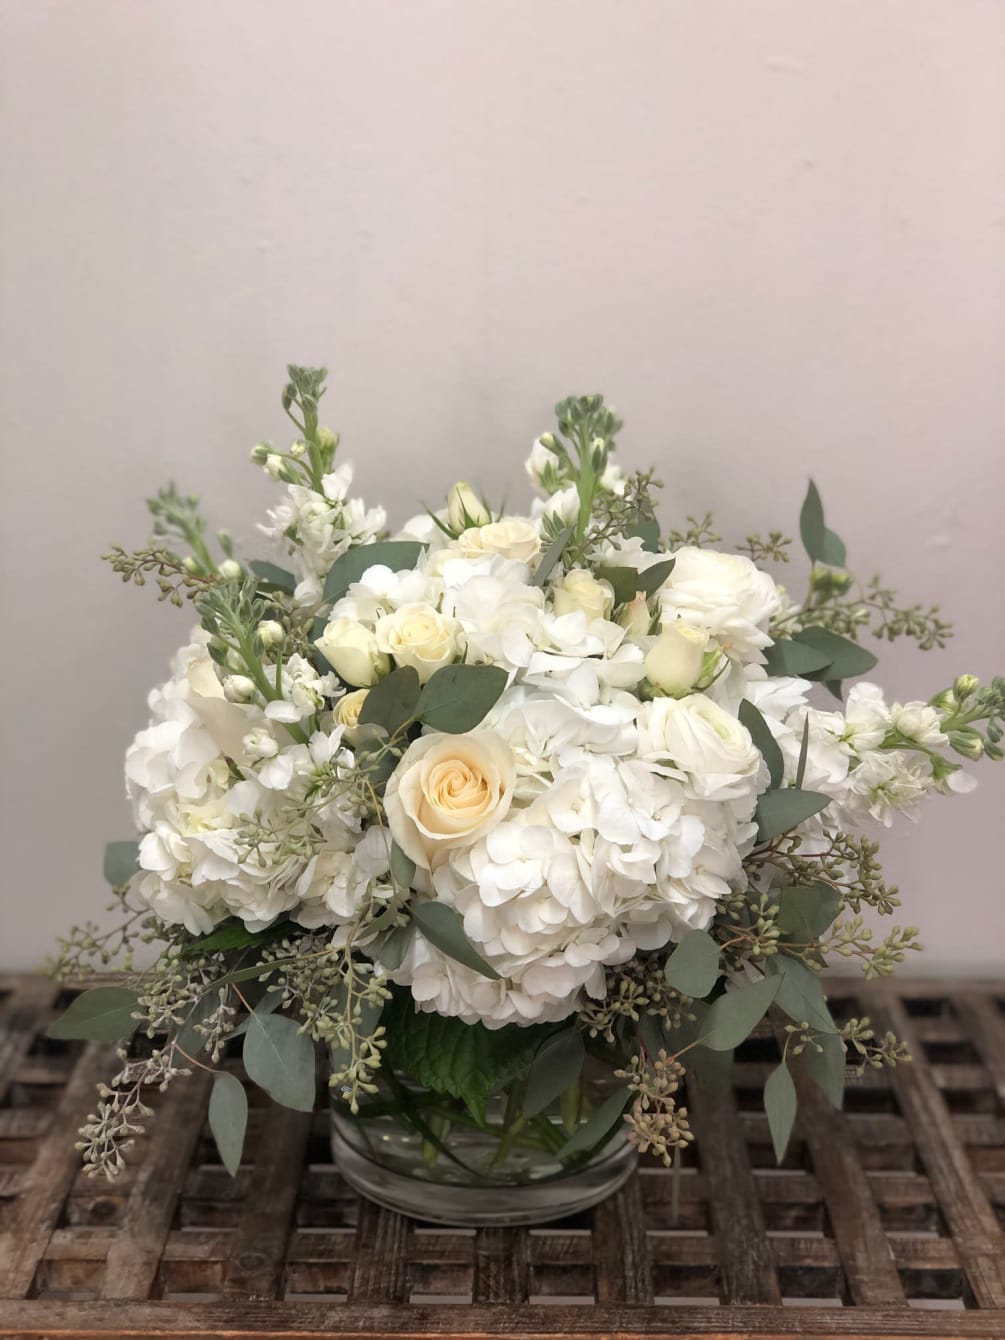 Assortment of all white flowers, pretty soft greenery in a low vase.

Flowers